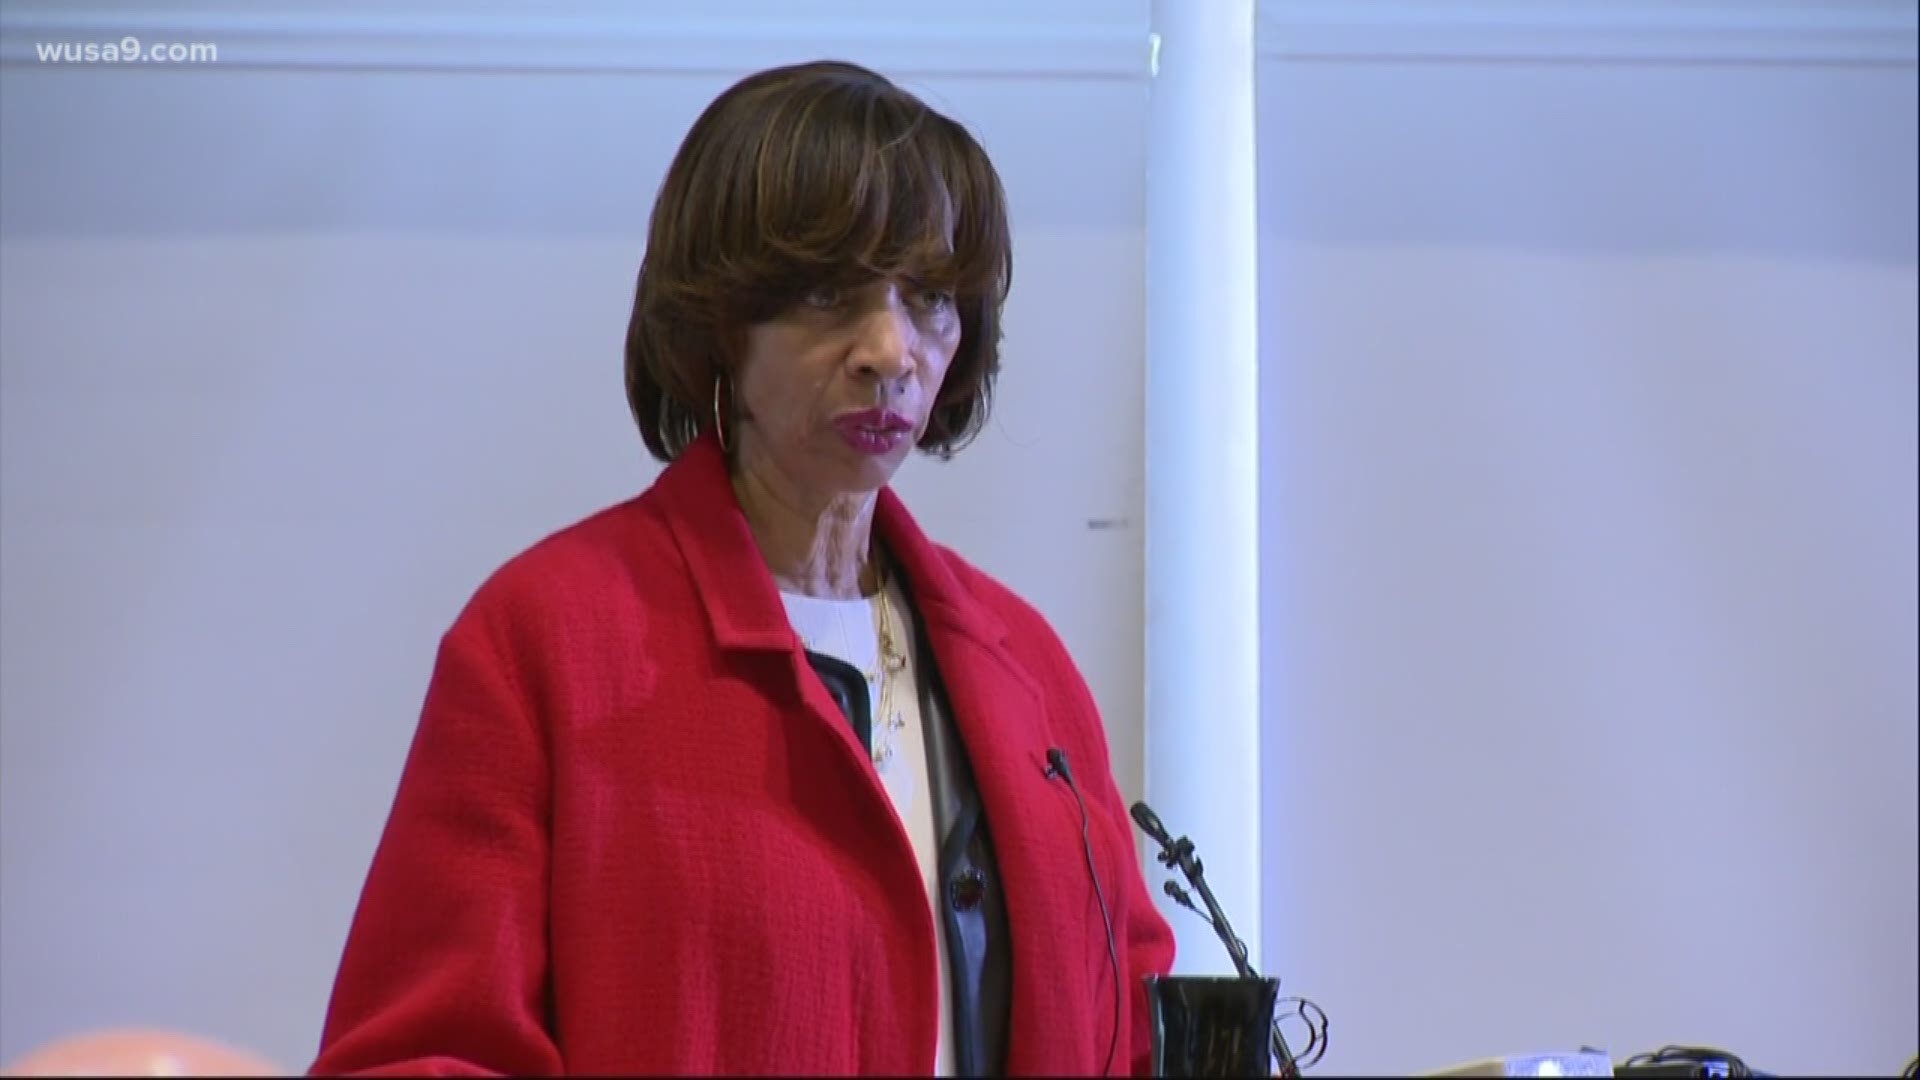 Pugh resigned in May.  She left office following revelations that the hospital board she sat on, bought large quantities of her "Healthy Holly" children's book.